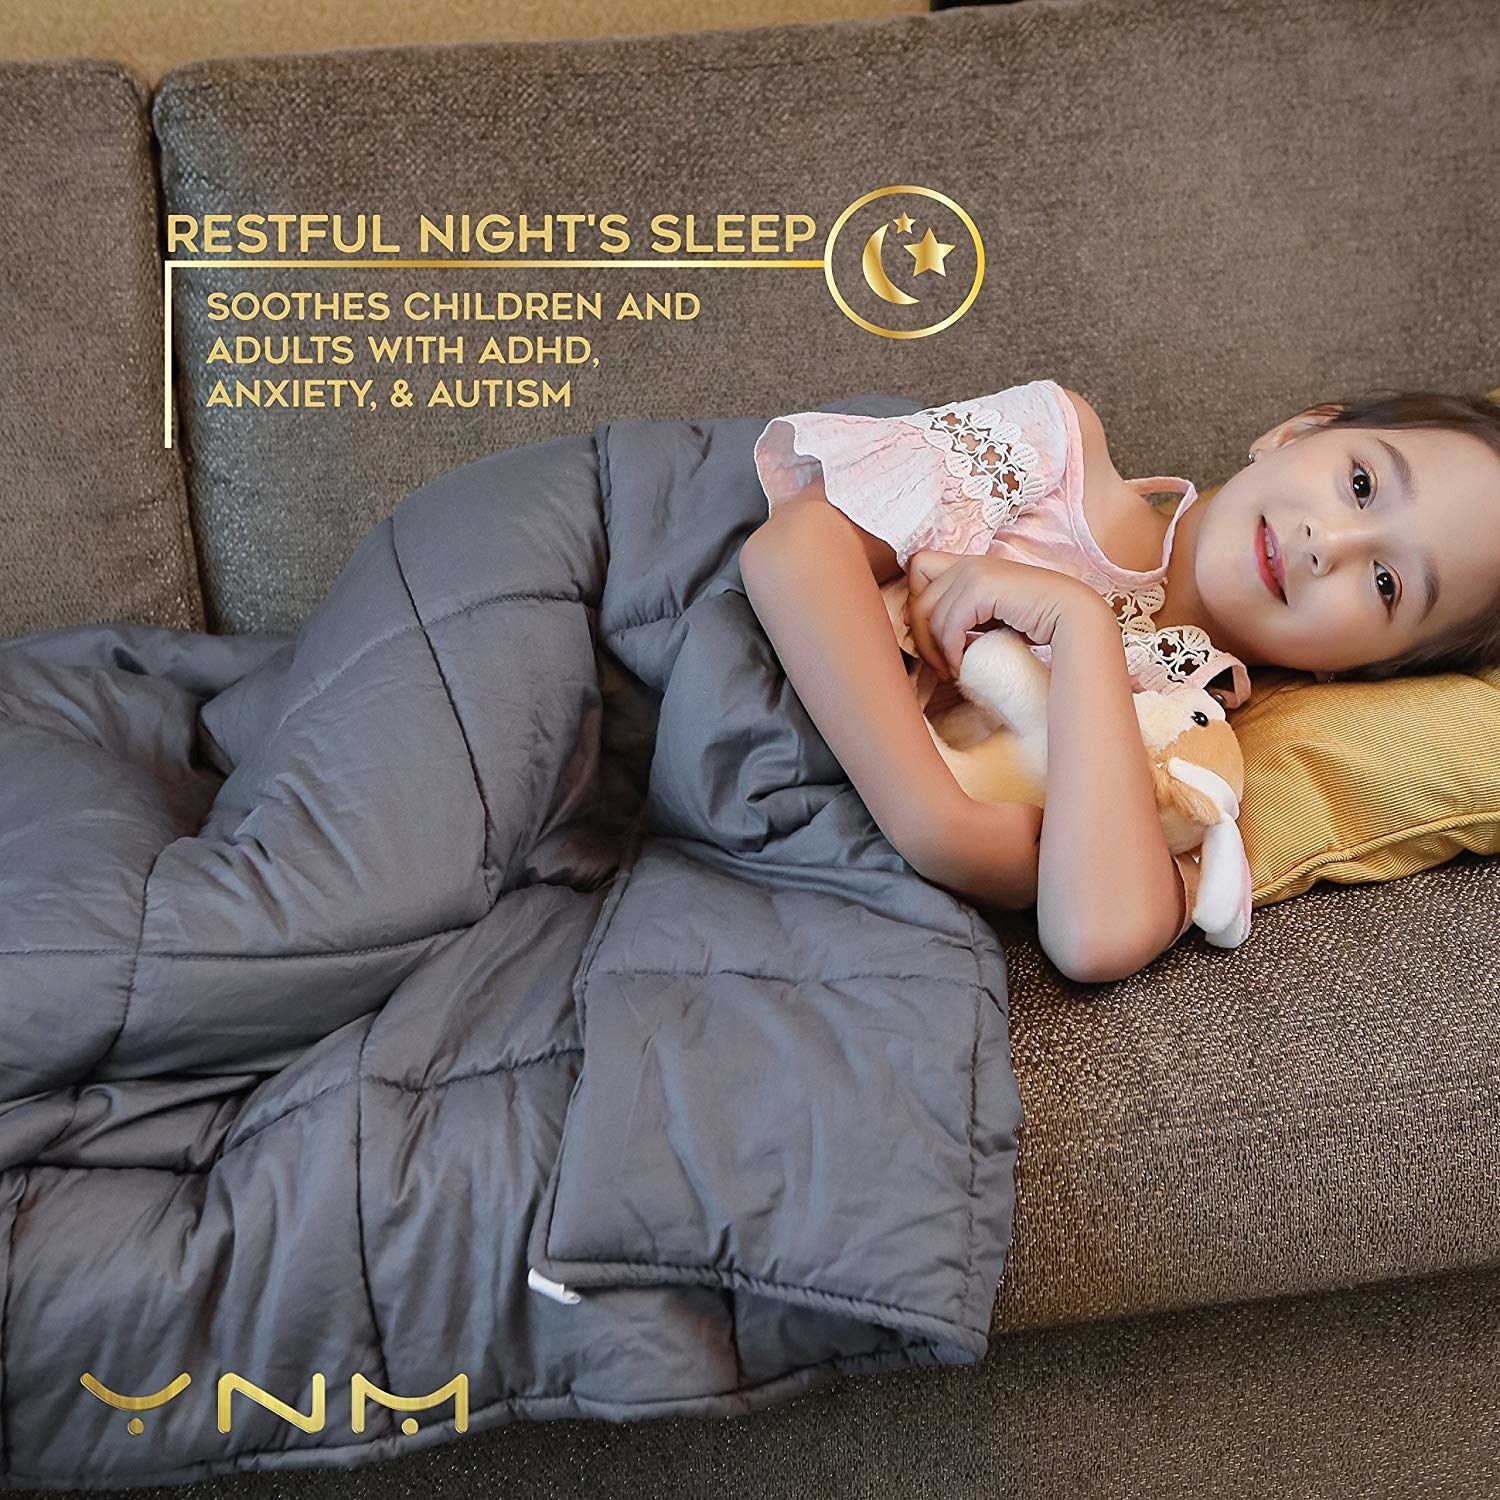 Sound Every Alarm You Have, This Incredible Blanket Is Here To Help You